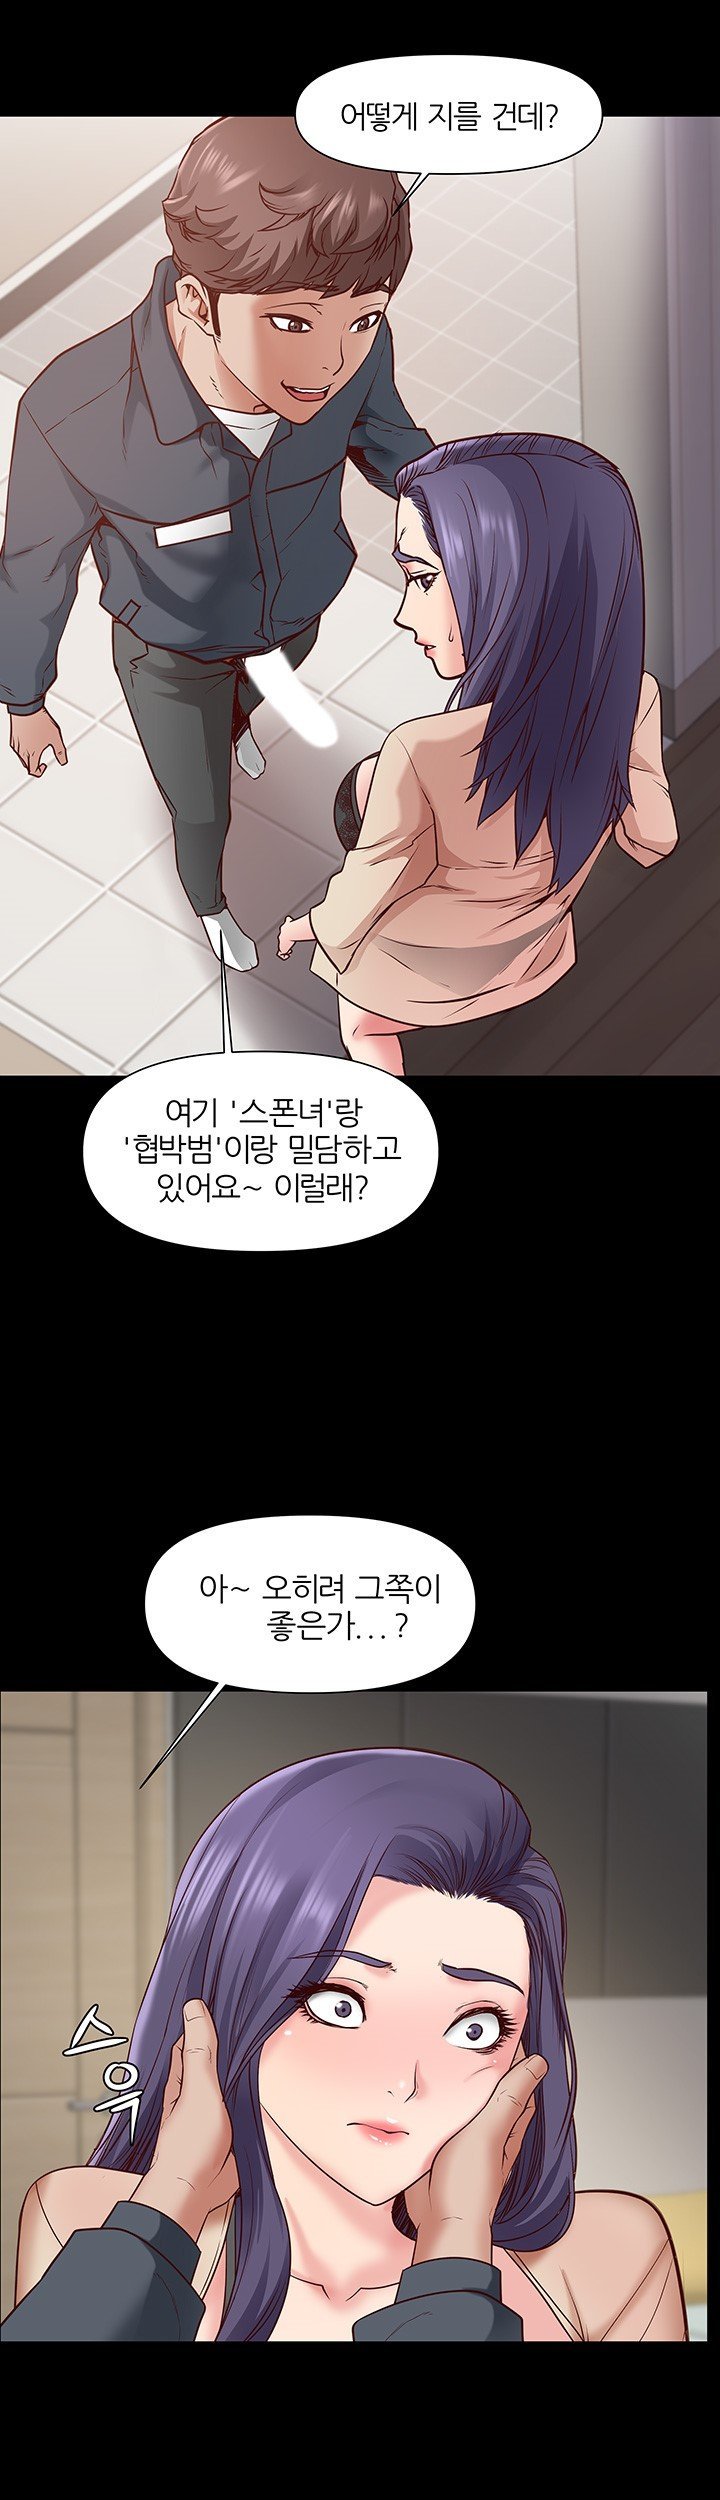 bs-anger-raw-chap-2-25